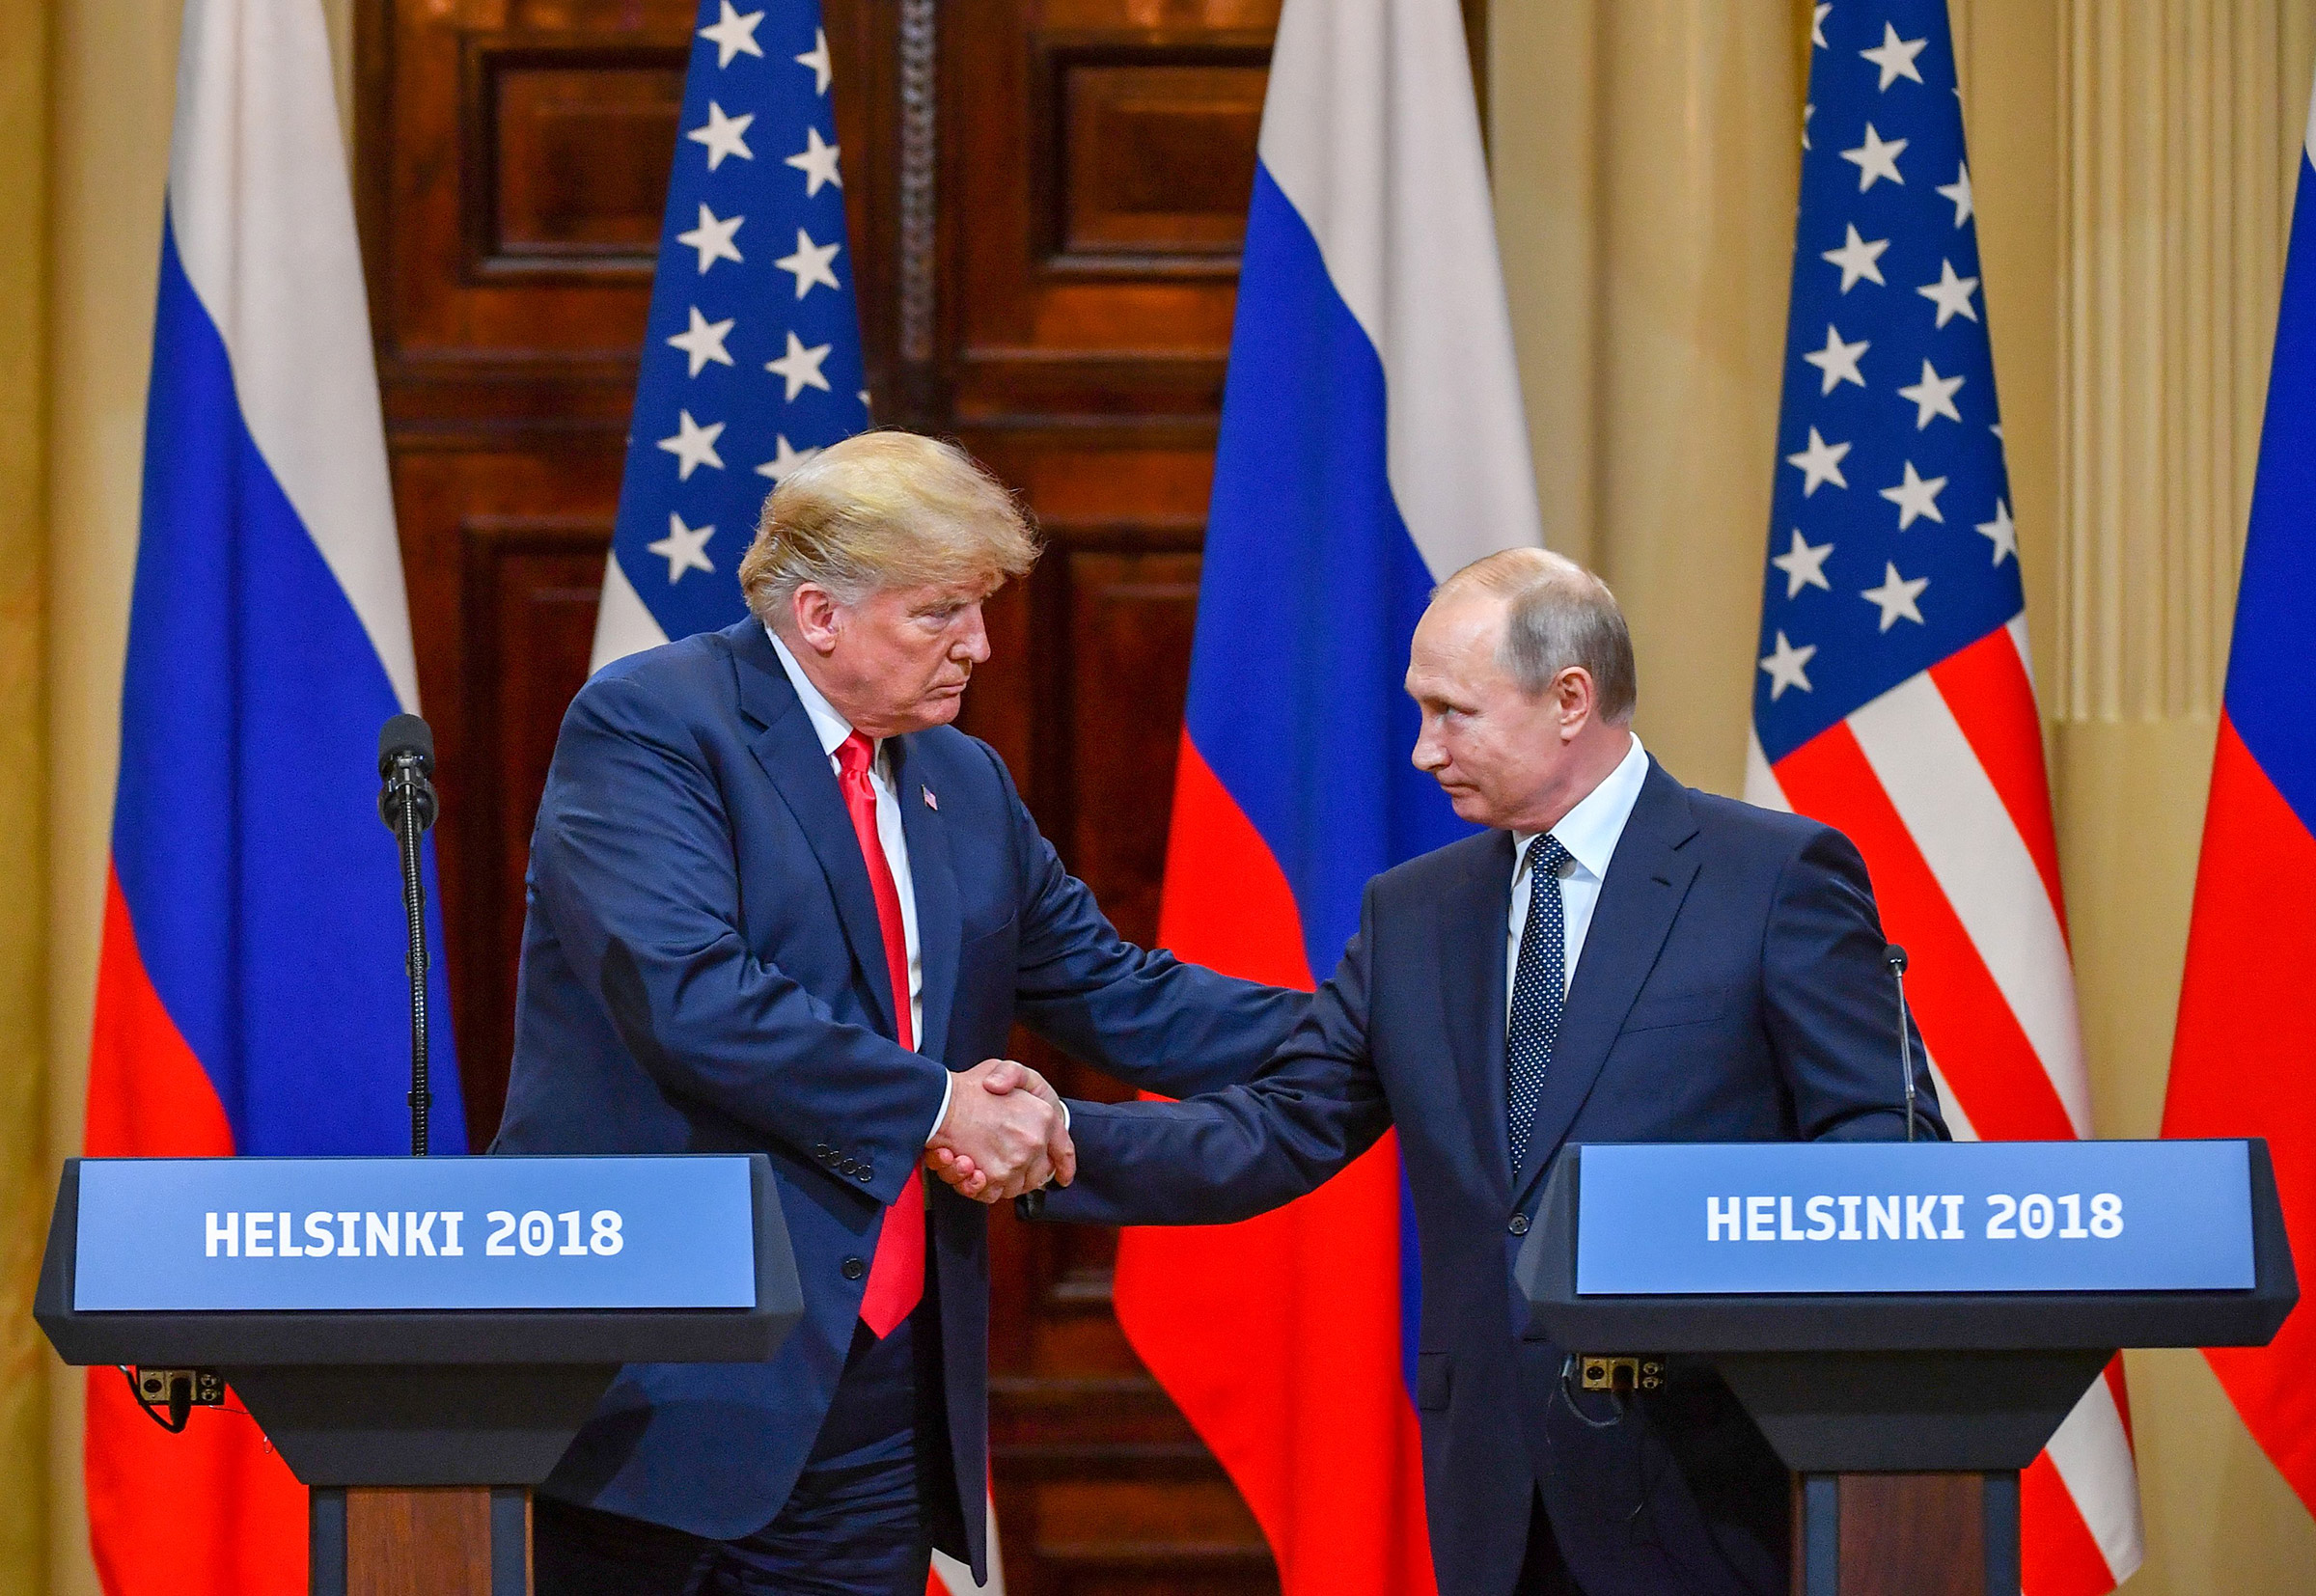 U.S. President Donald Trump and Russia's President Vladimir Putin shake hands before attending a joint press conference in Helsinki, on July 16, 2018. (Yuri Kadobnov—AFP/Getty Images)